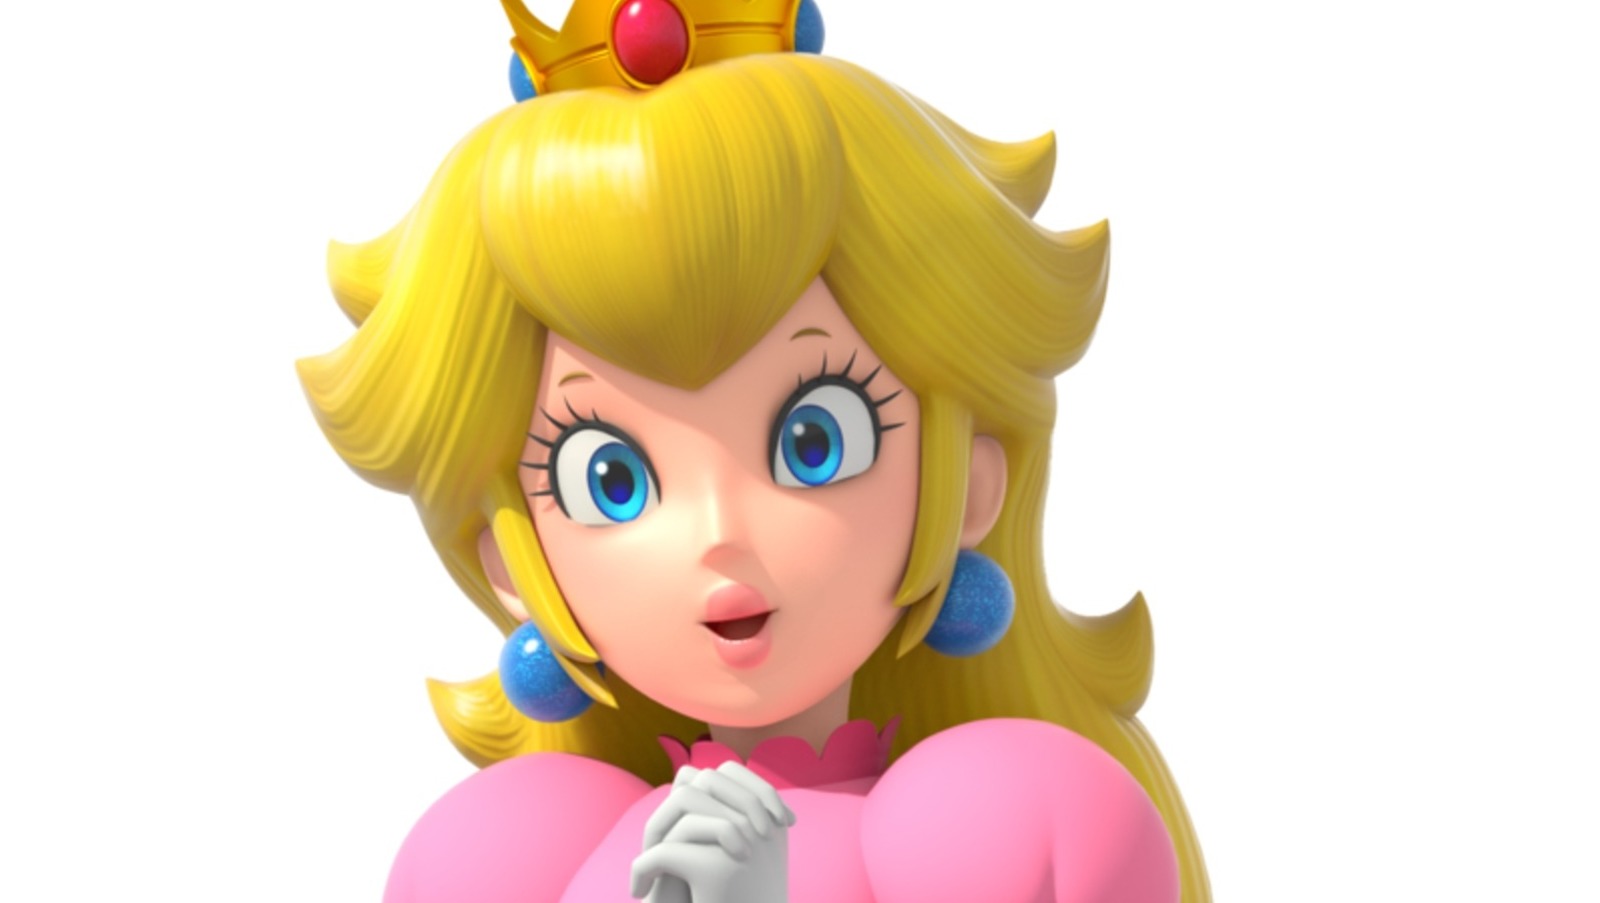 The Real Reason Mario And Peach Will Never Work As A Couple